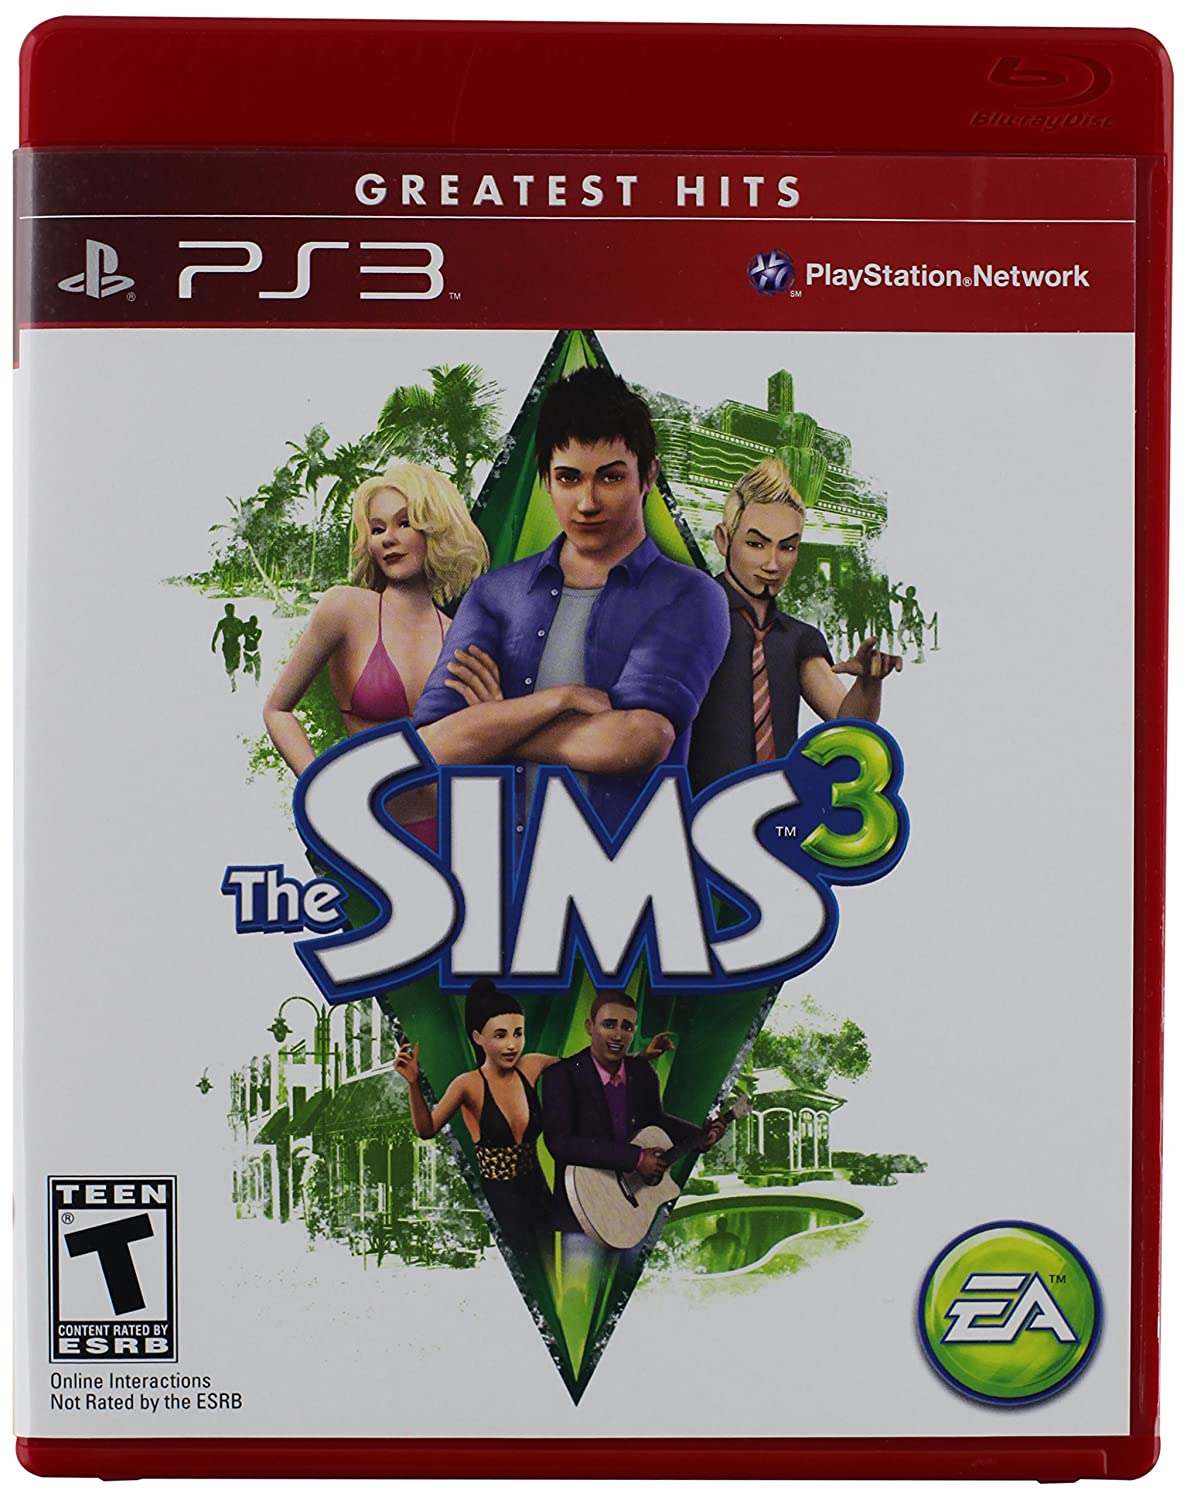 The Sims 3 (Greatest Hits) - PS3 — VIDEOGAMESPLUS.CA